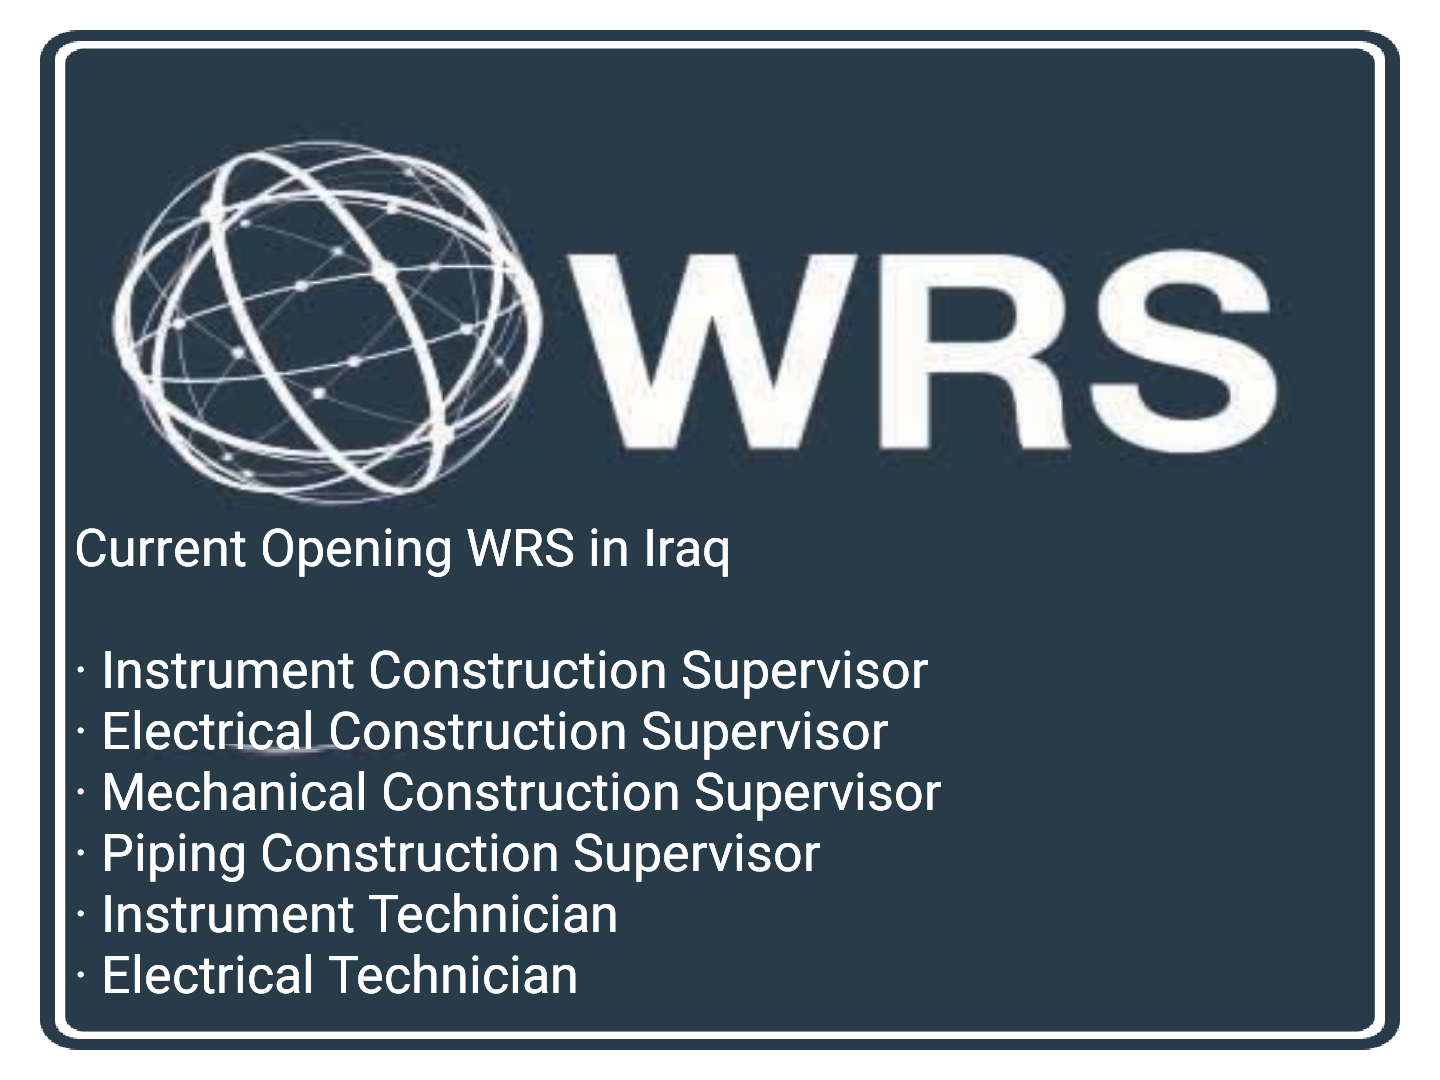 Instrument, Electrical, Mechanical, Piping Constructio Supervisor Jobs